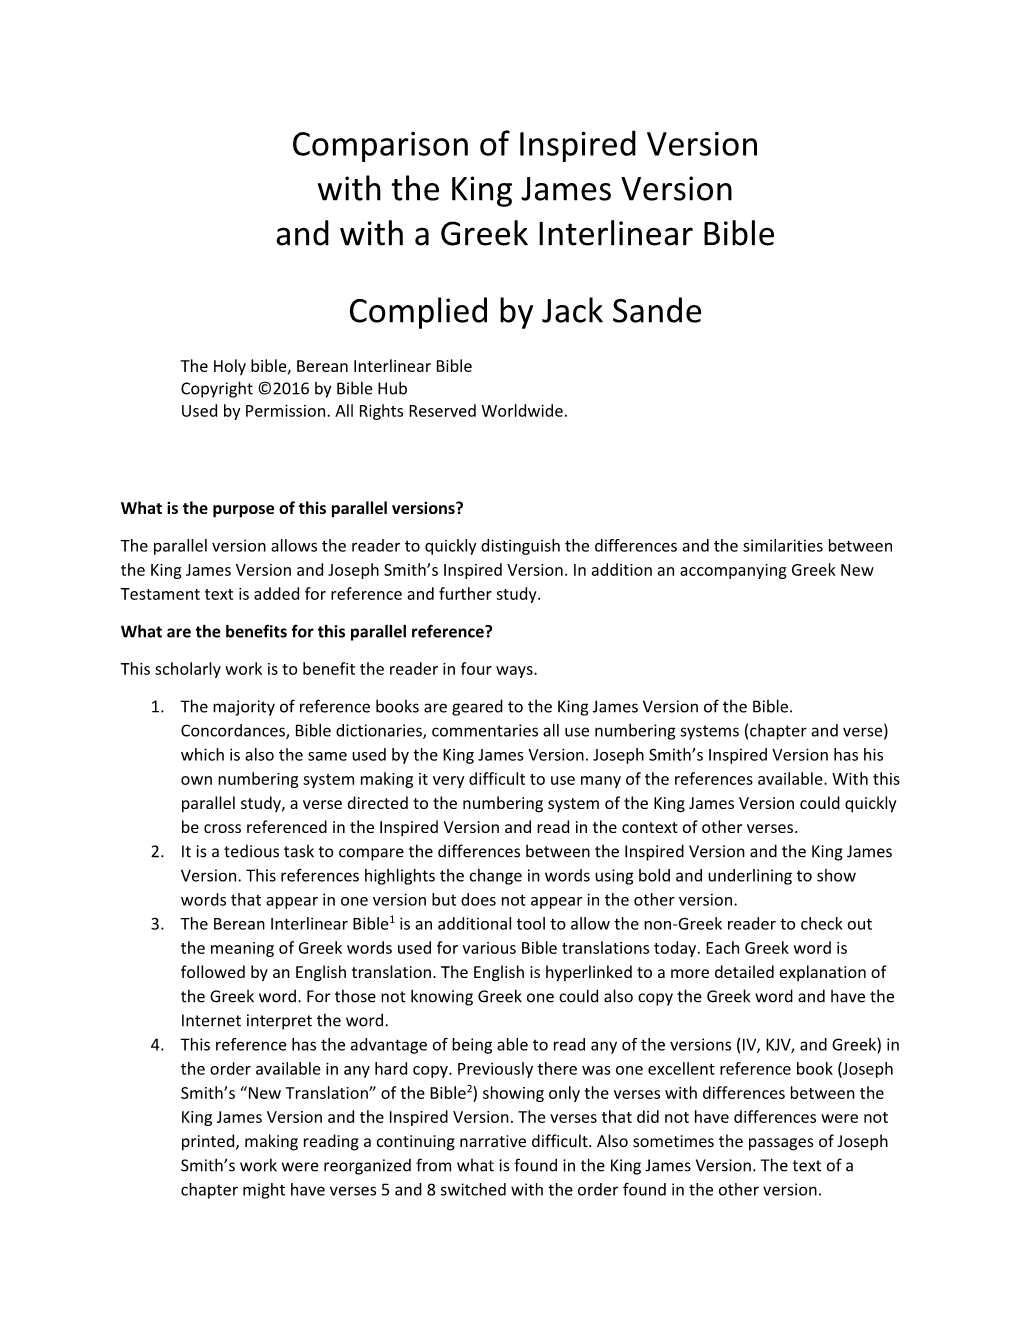 Comparison of Inspired Version with the King James Version and with a Greek Interlinear Bible